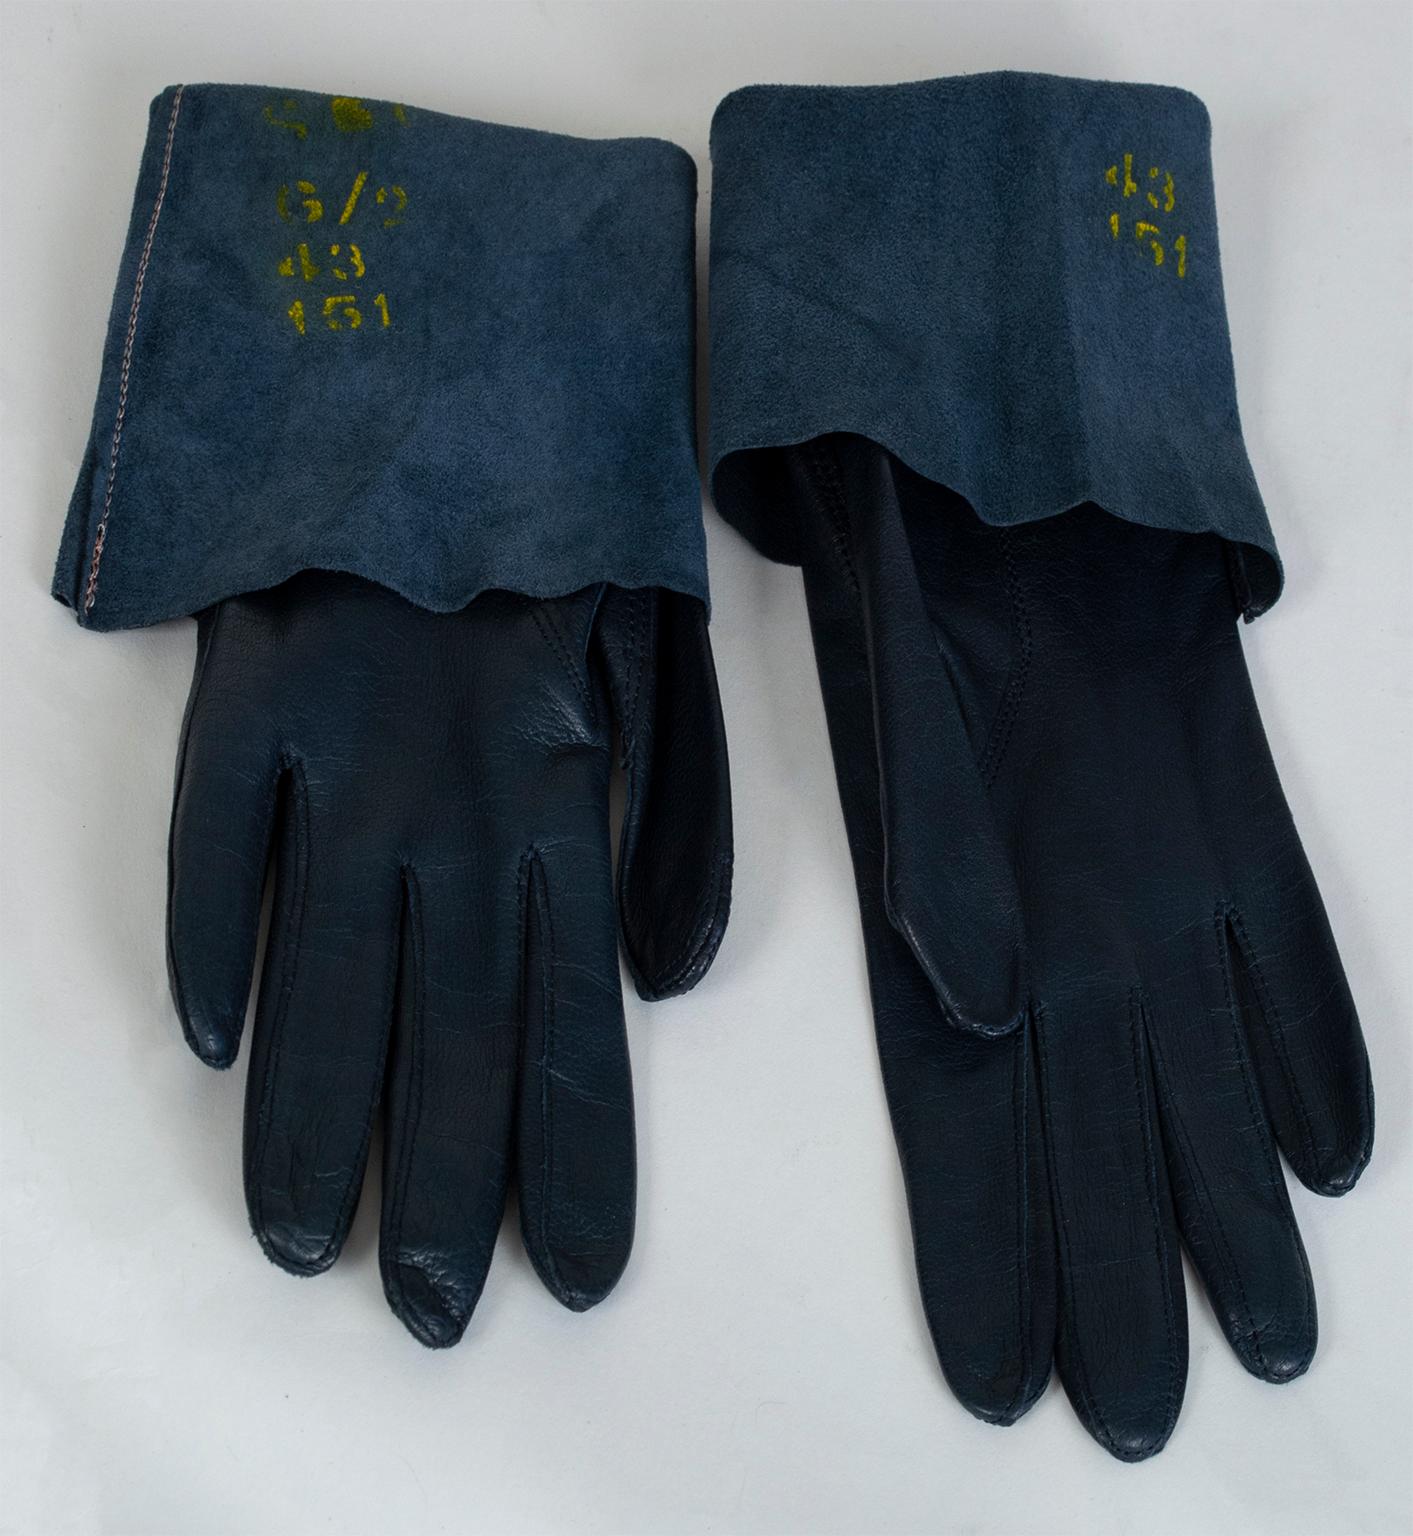 Black Navy Kidskin Leather Dress Gauntlet Forearm Gloves - Extra Small, 1950s For Sale